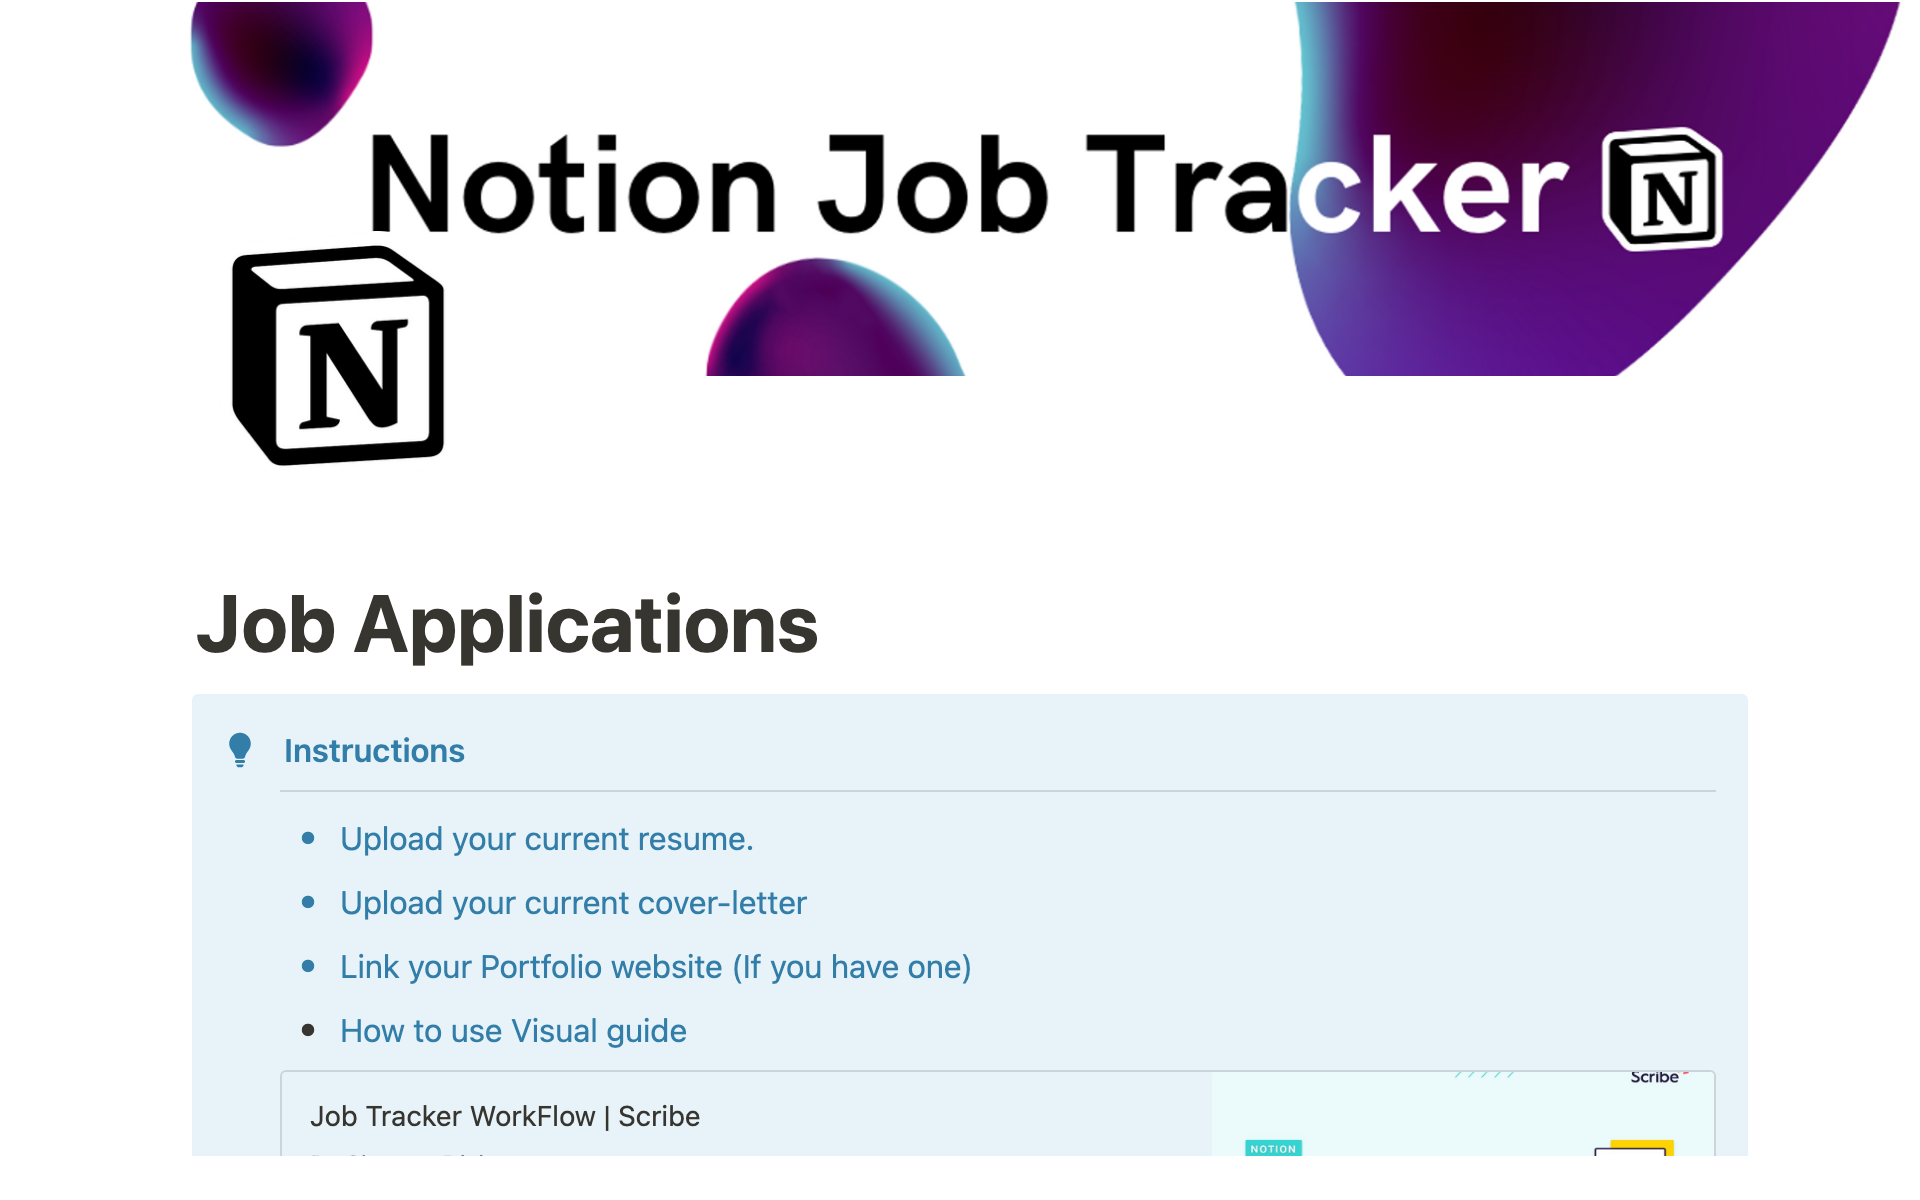 Keep track of the entire job application process all on one page.